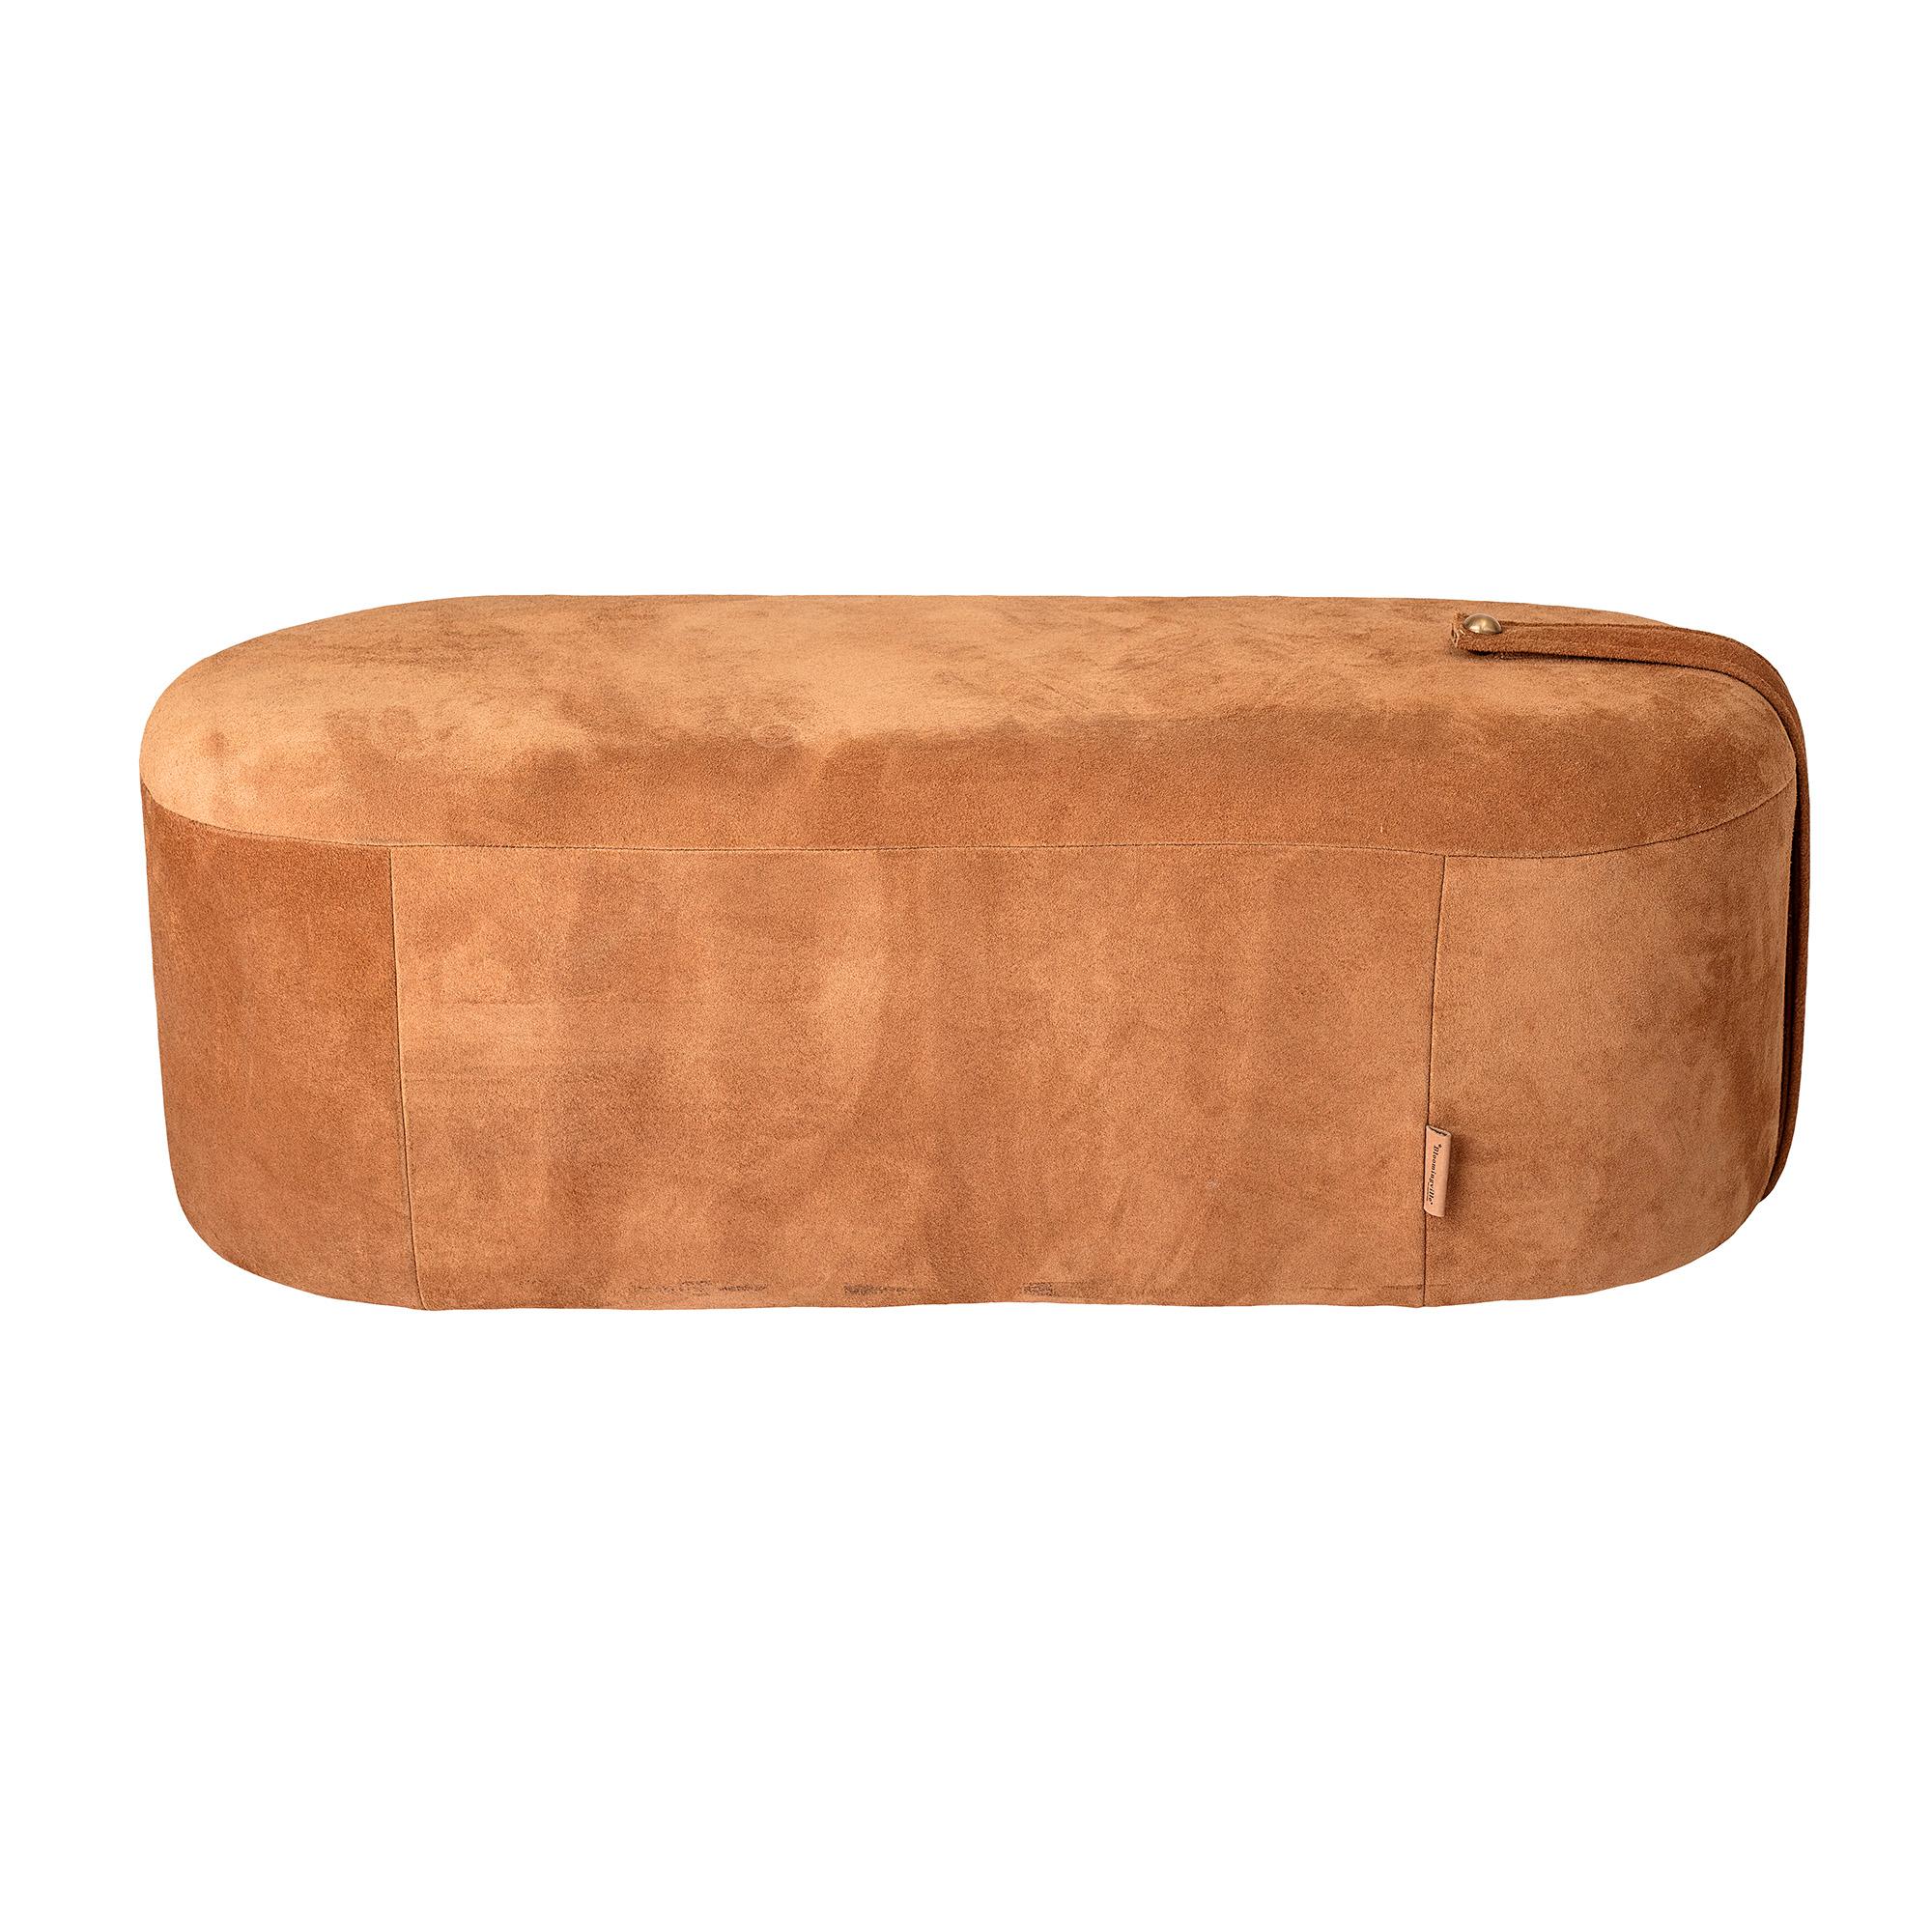 Cognac brown suede capsule shaped ottoman pour bench. 100% leather top-stitched upholstery with side detail. Modern and clean.